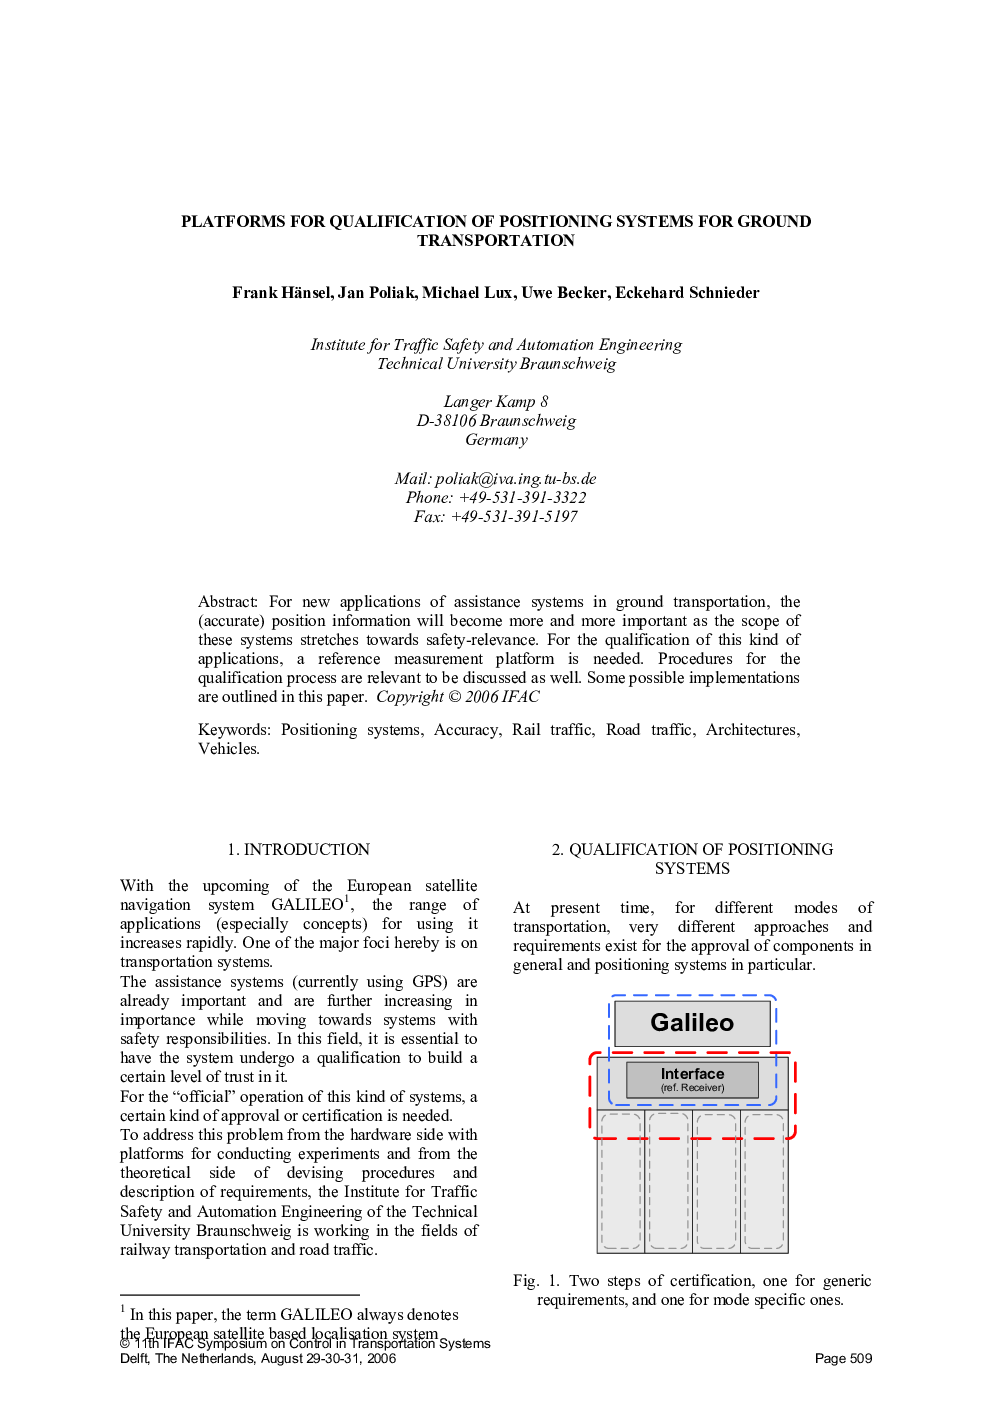 PLATFORMS FOR QUALIFICATION OF POSITIONING SYSTEMS FOR GROUND TRANSPORTATION 